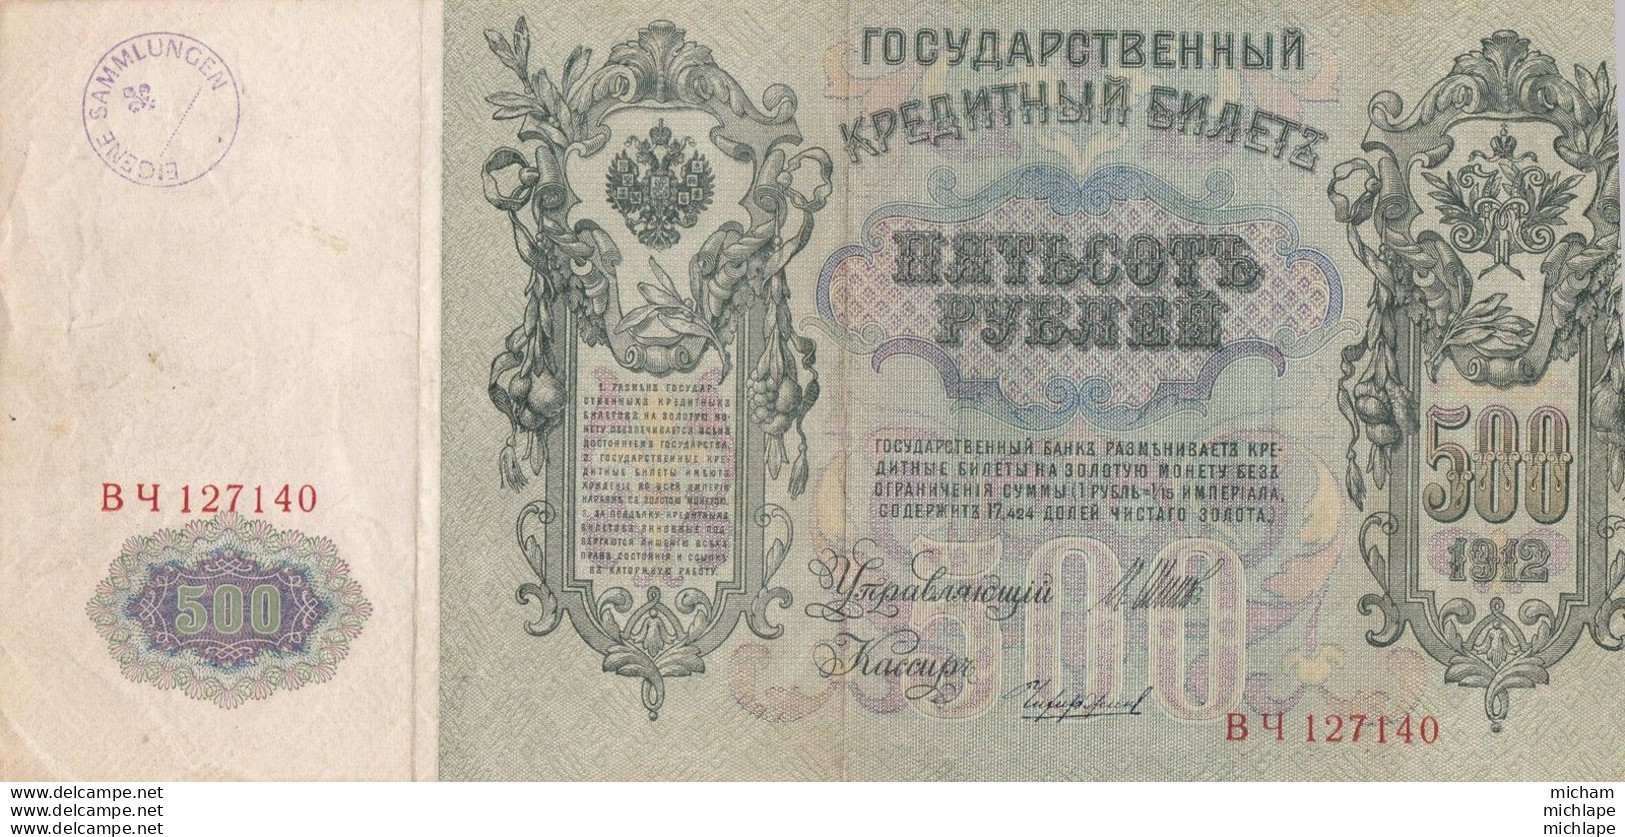 Russie 500 Roubles 1912 - Russia